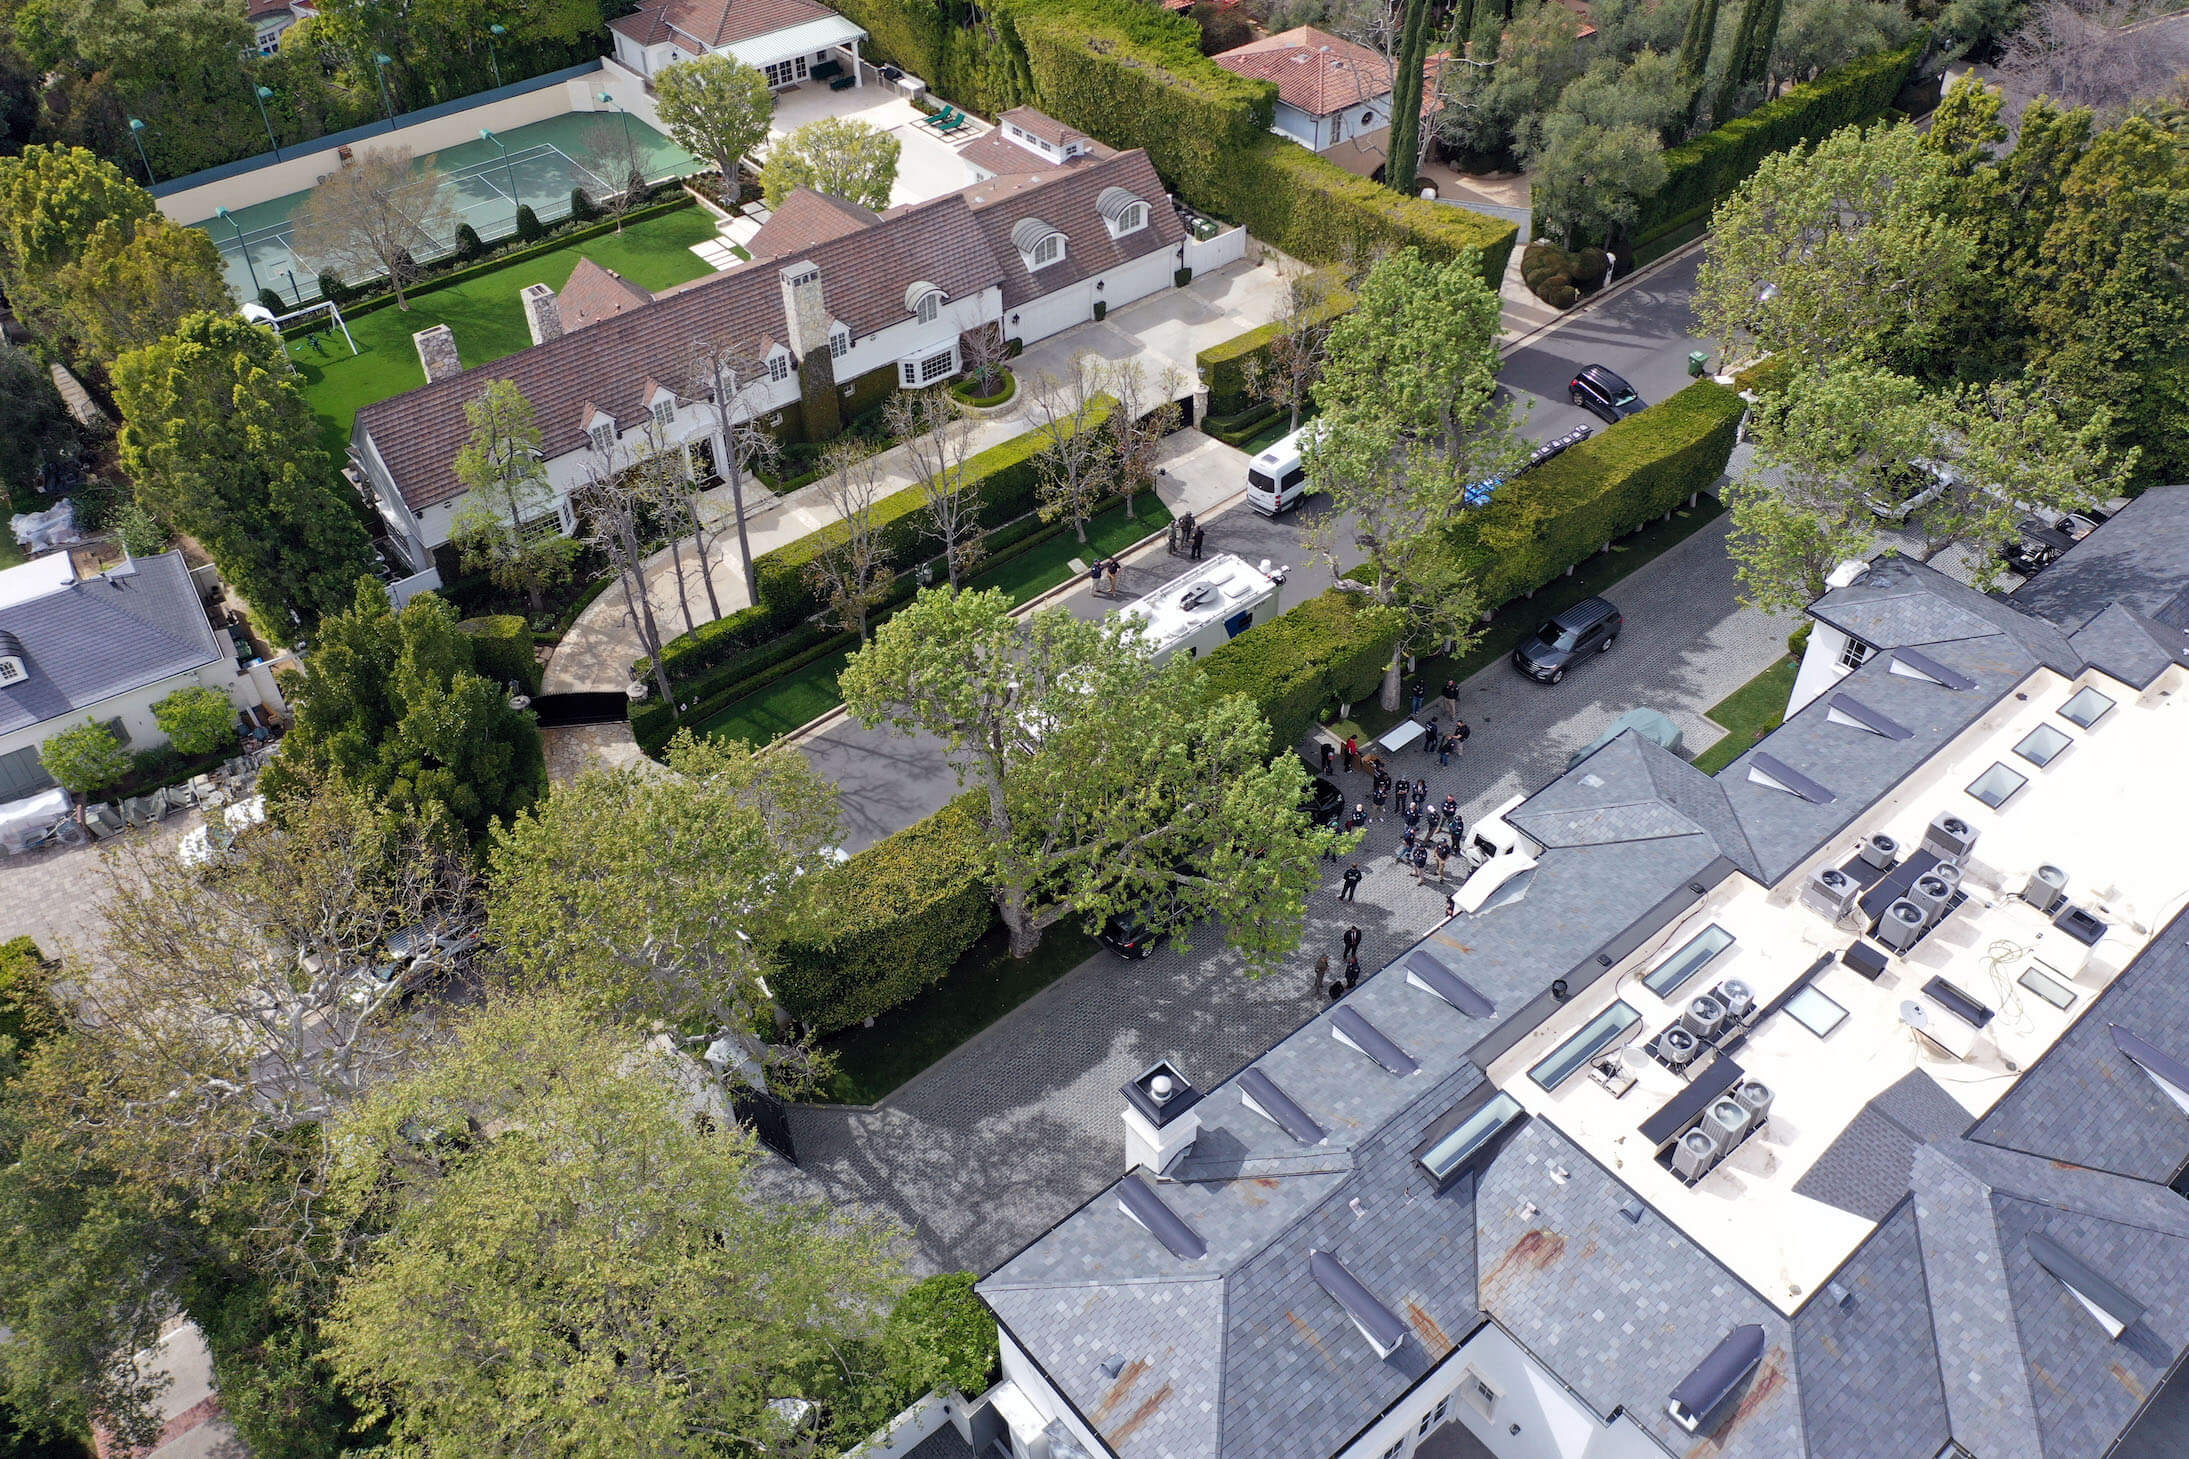 An aerial view of Sean 'P. Diddy' Combs' home in Los Angeles following Homeland Security raid